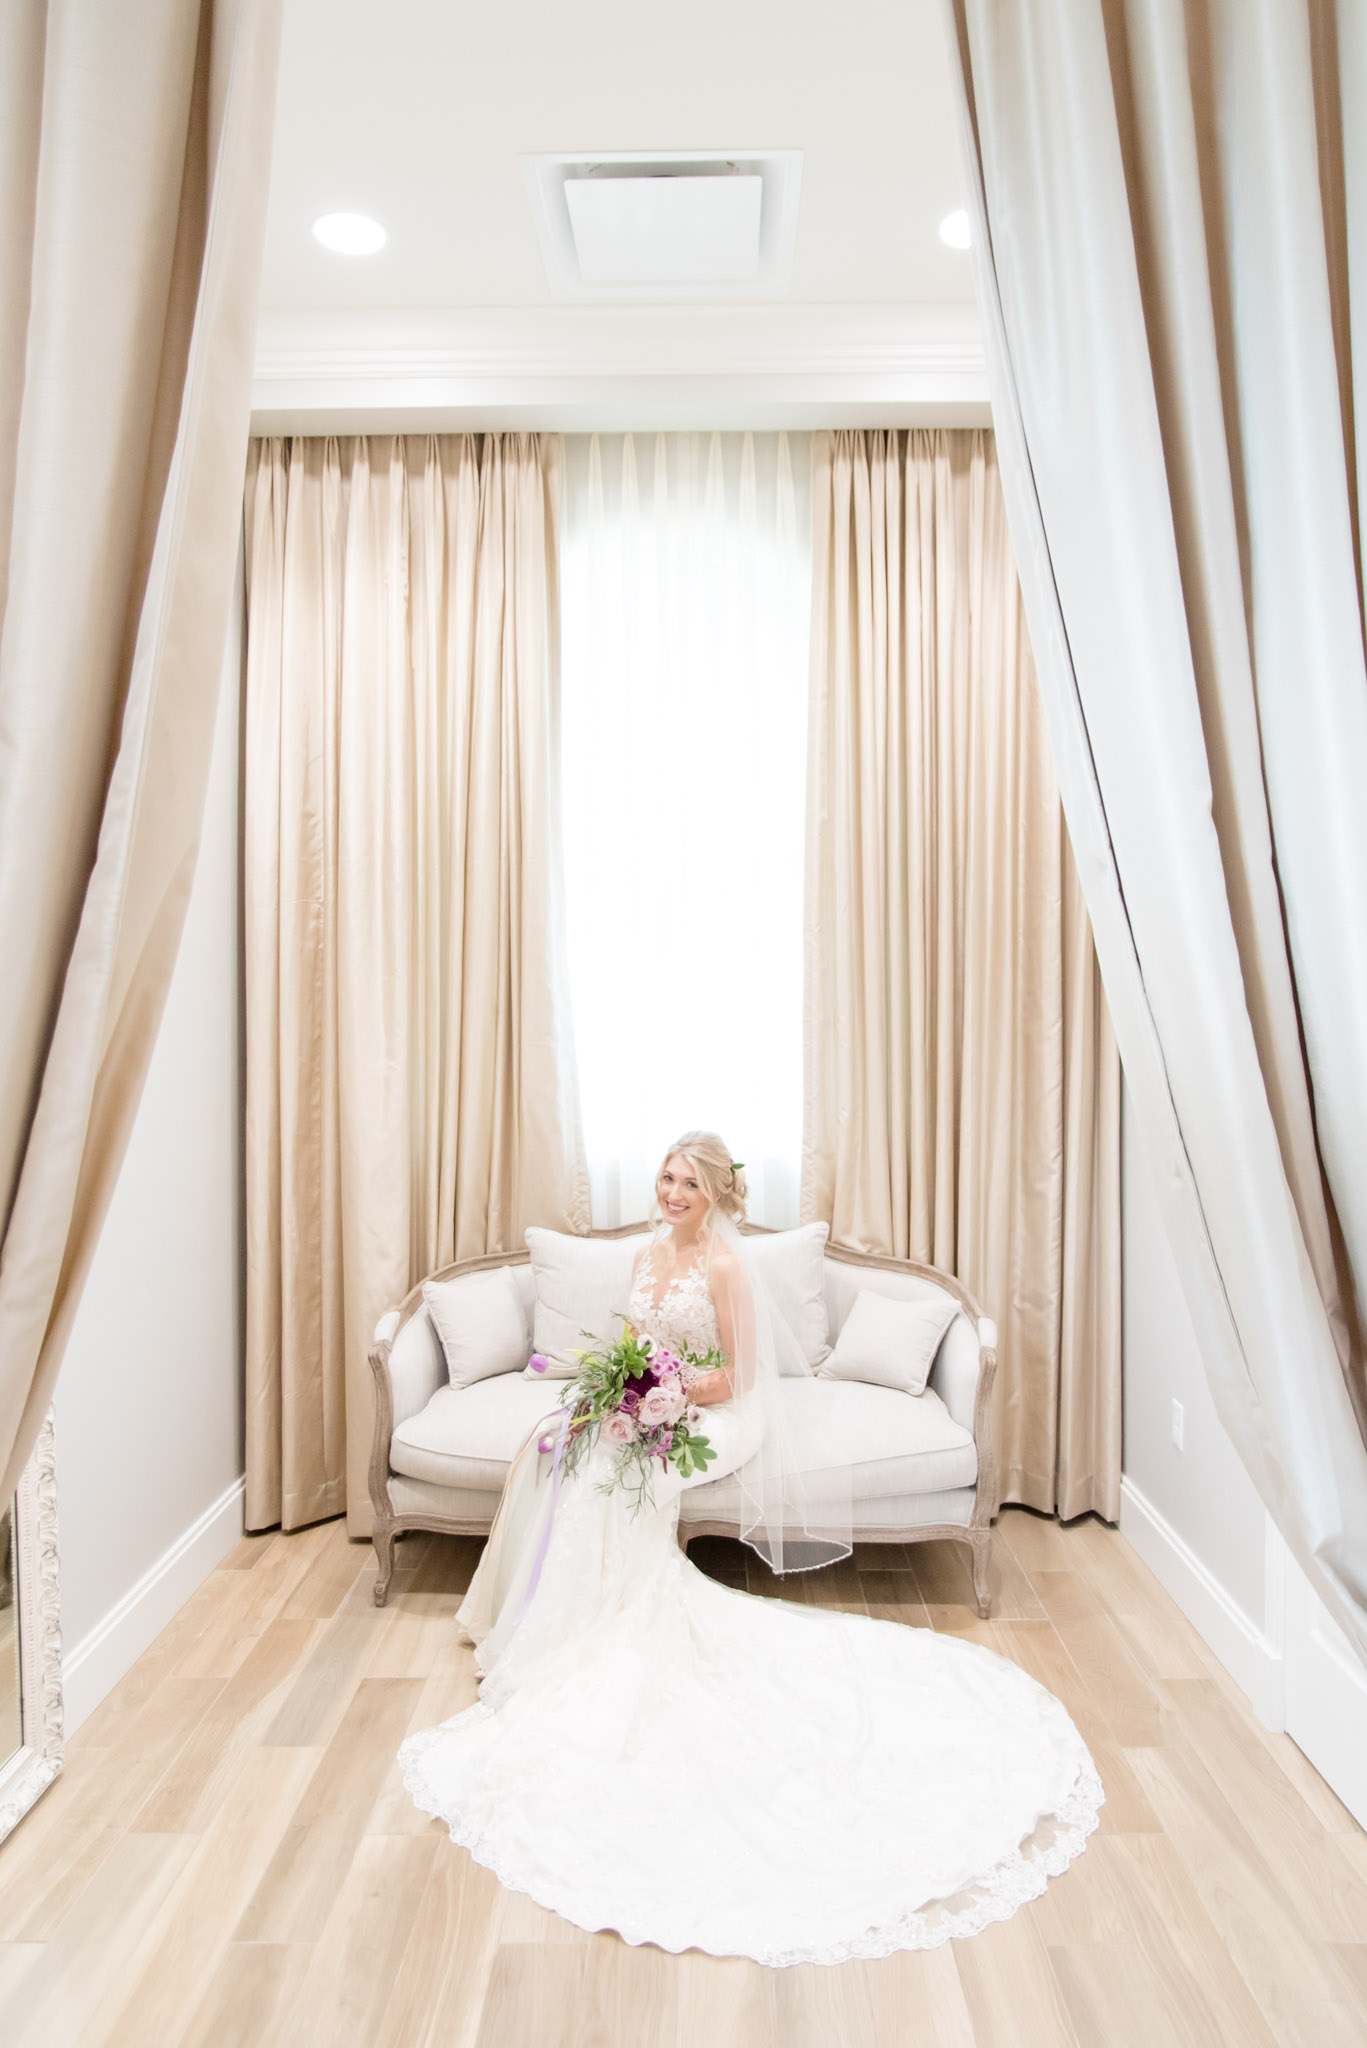 Bride sits on couch and smiles at camera.